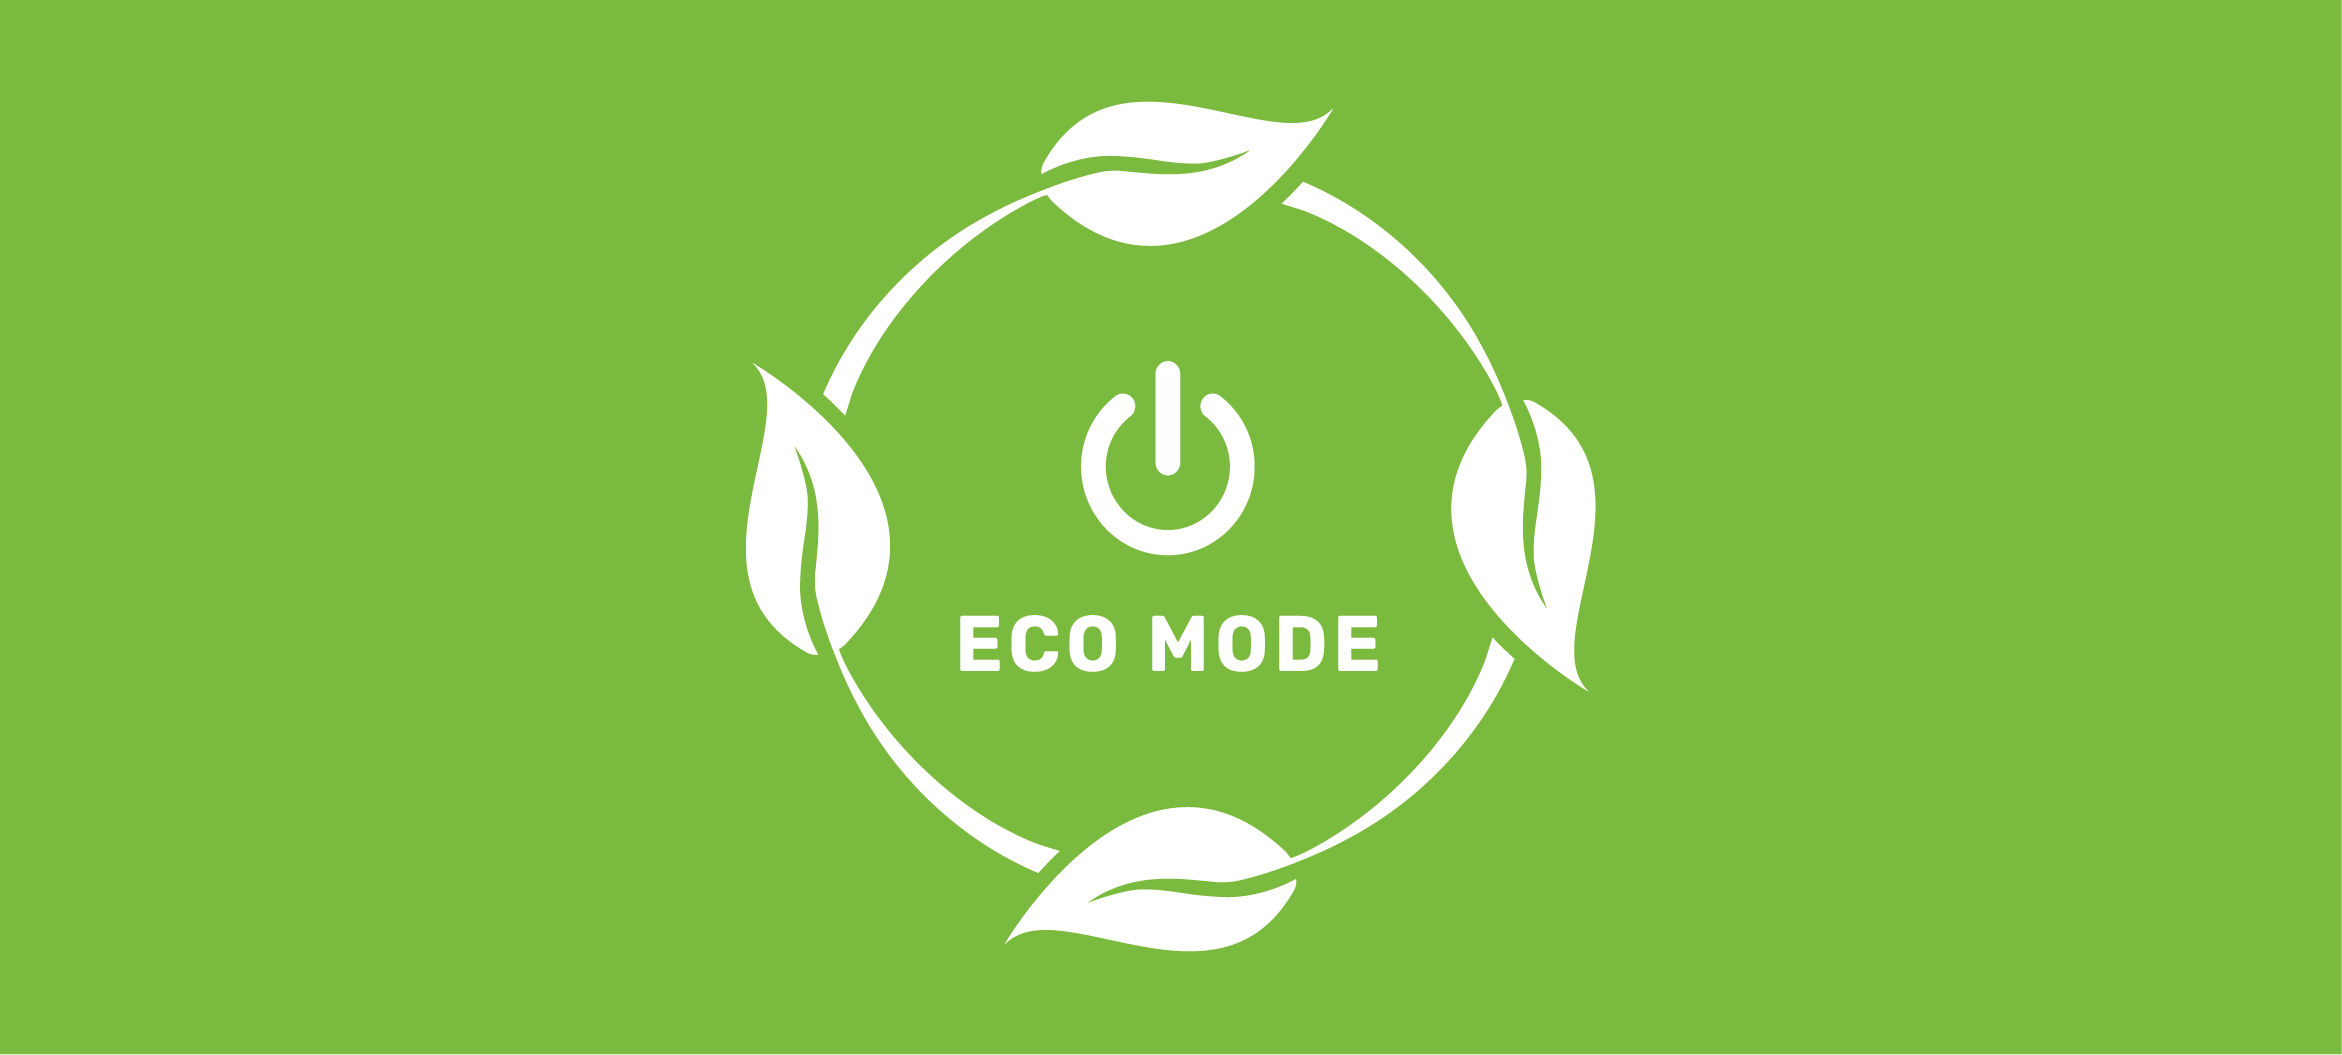 Eco Mode And Life Safety Applications